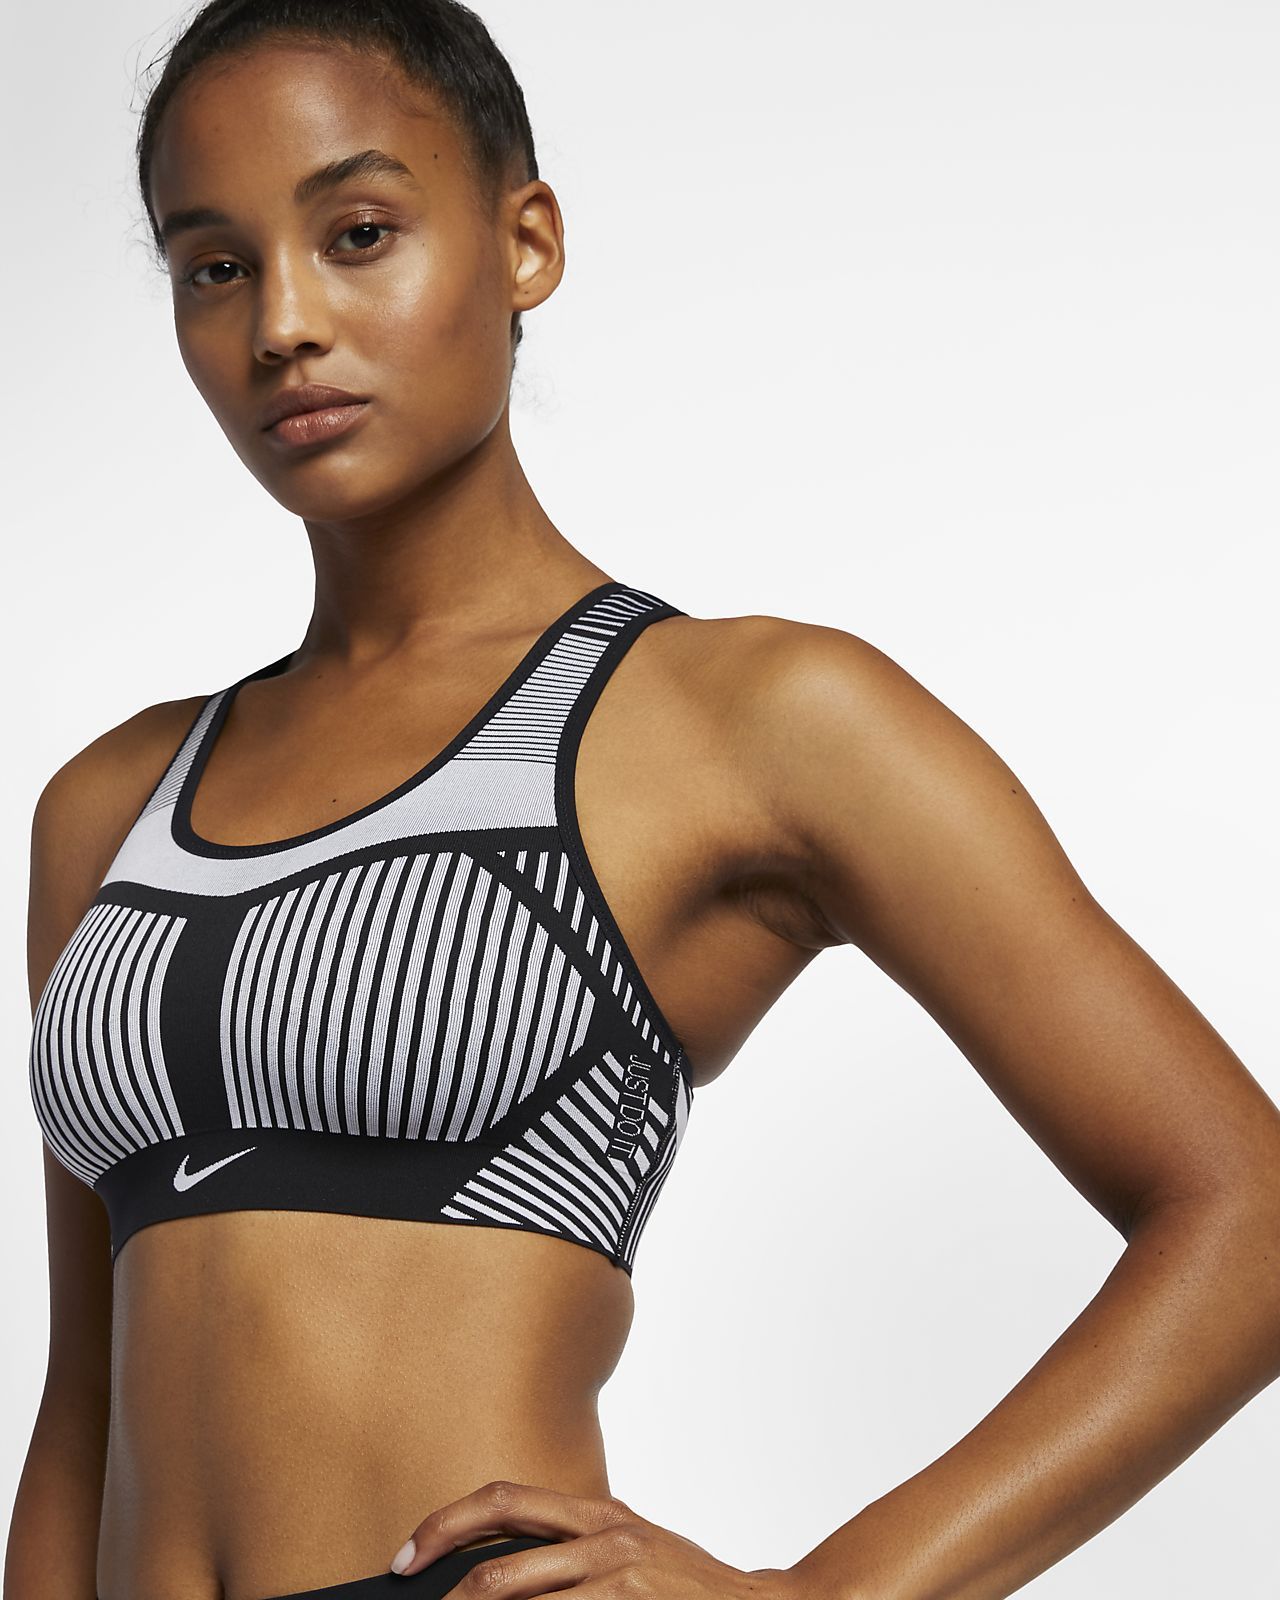 The best sports bras for running 2020